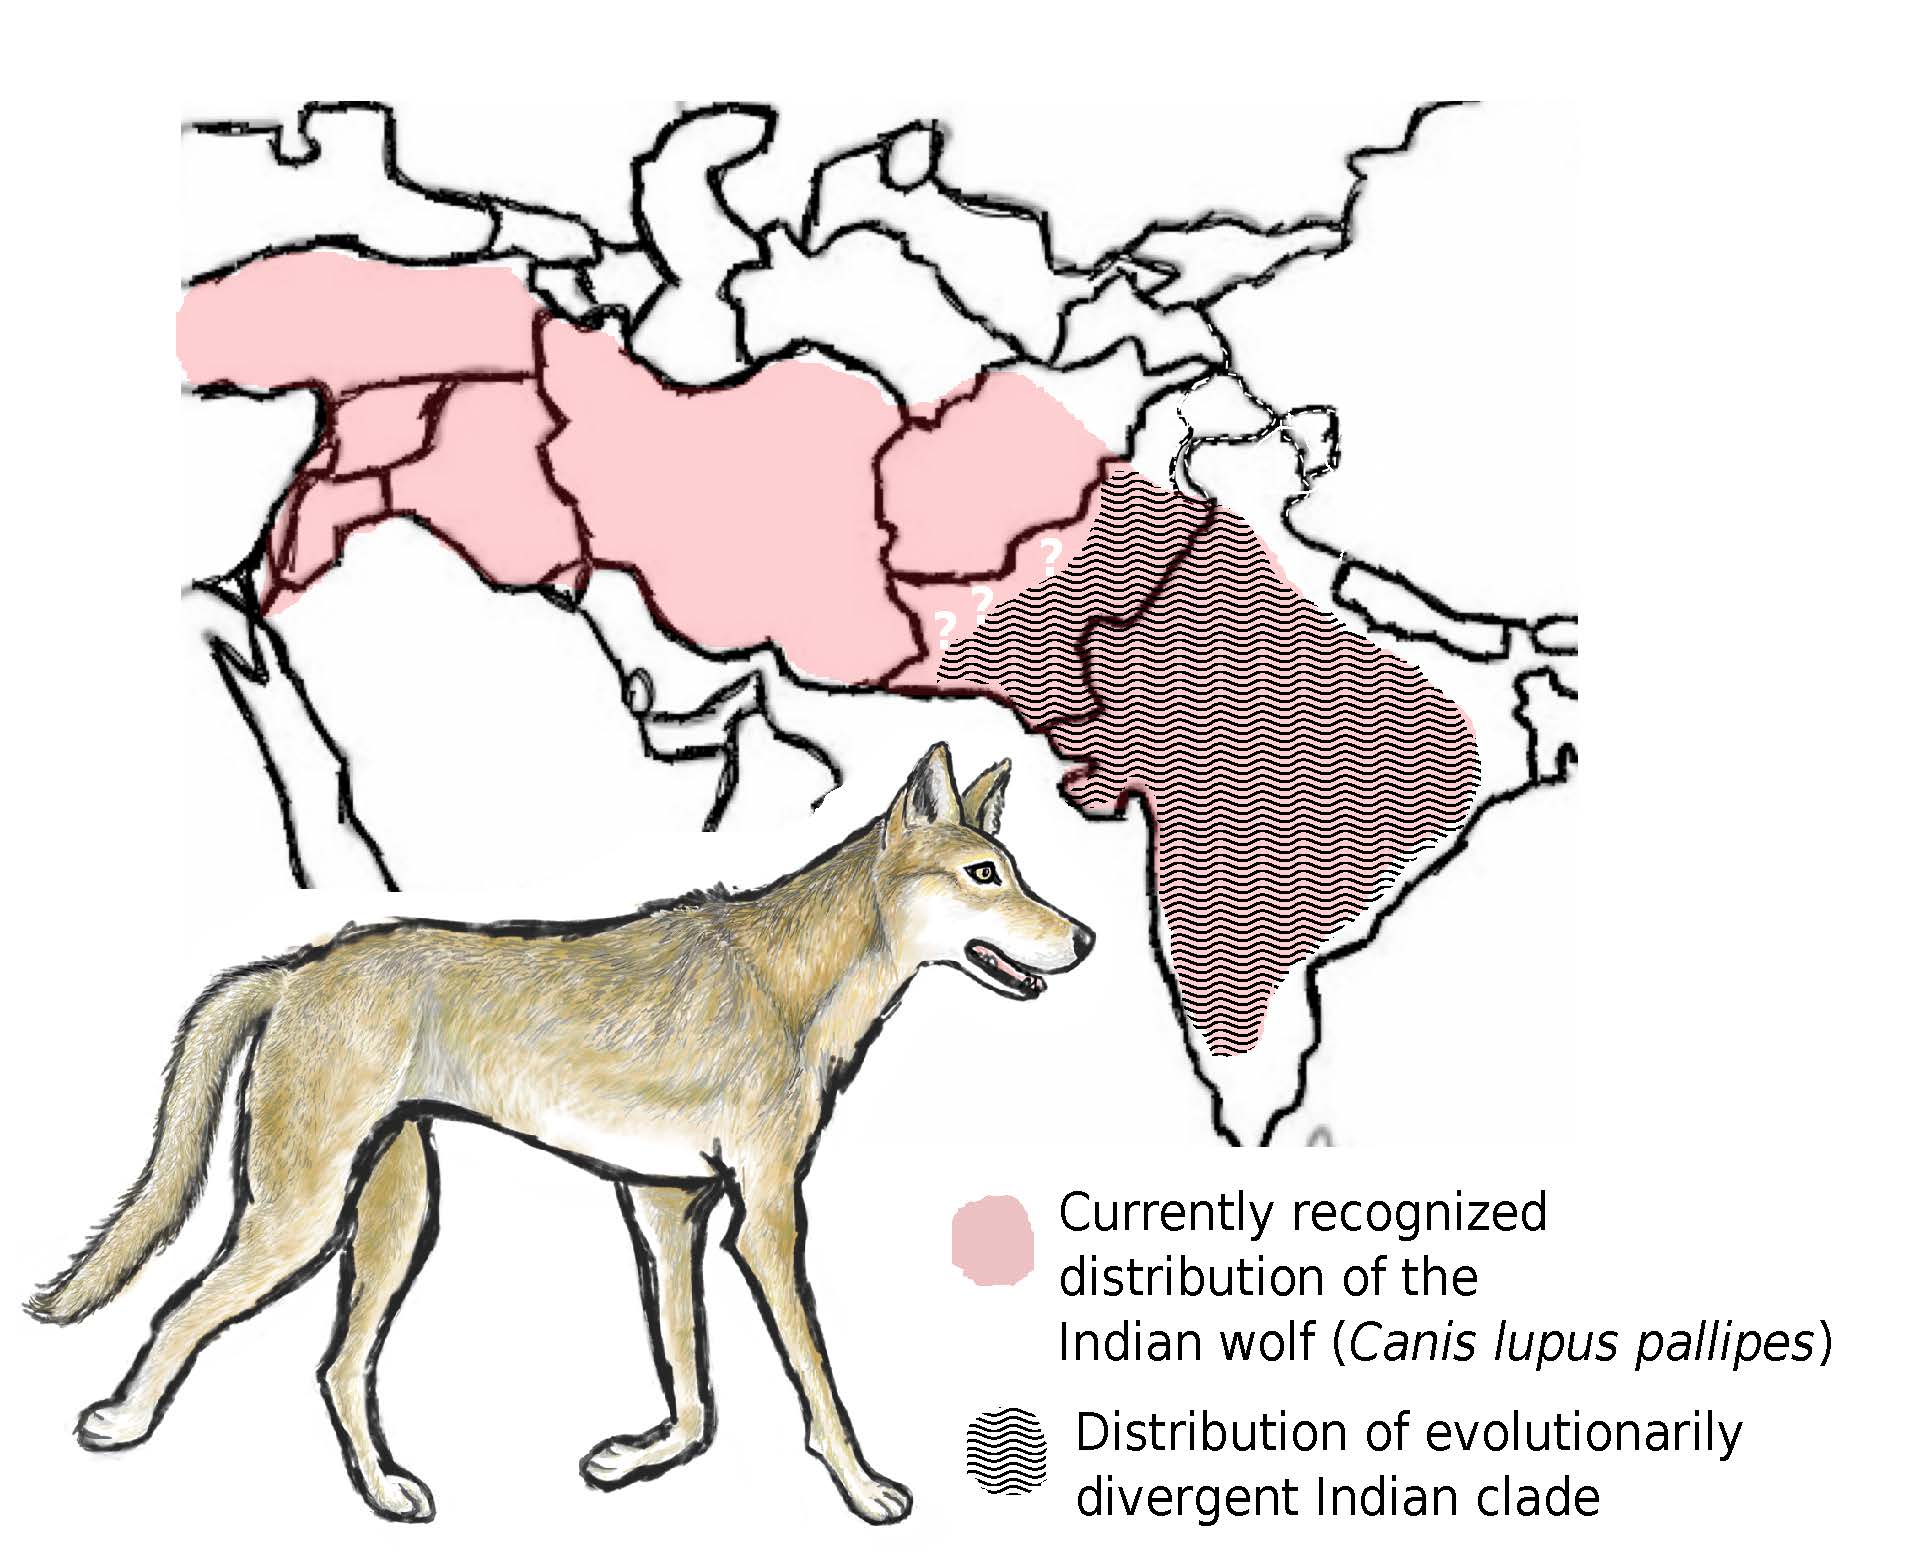 Illustration of Indian wolf with a pink and white map showing its recognized range versus what new scientific evidence indicates is its smaller range. 